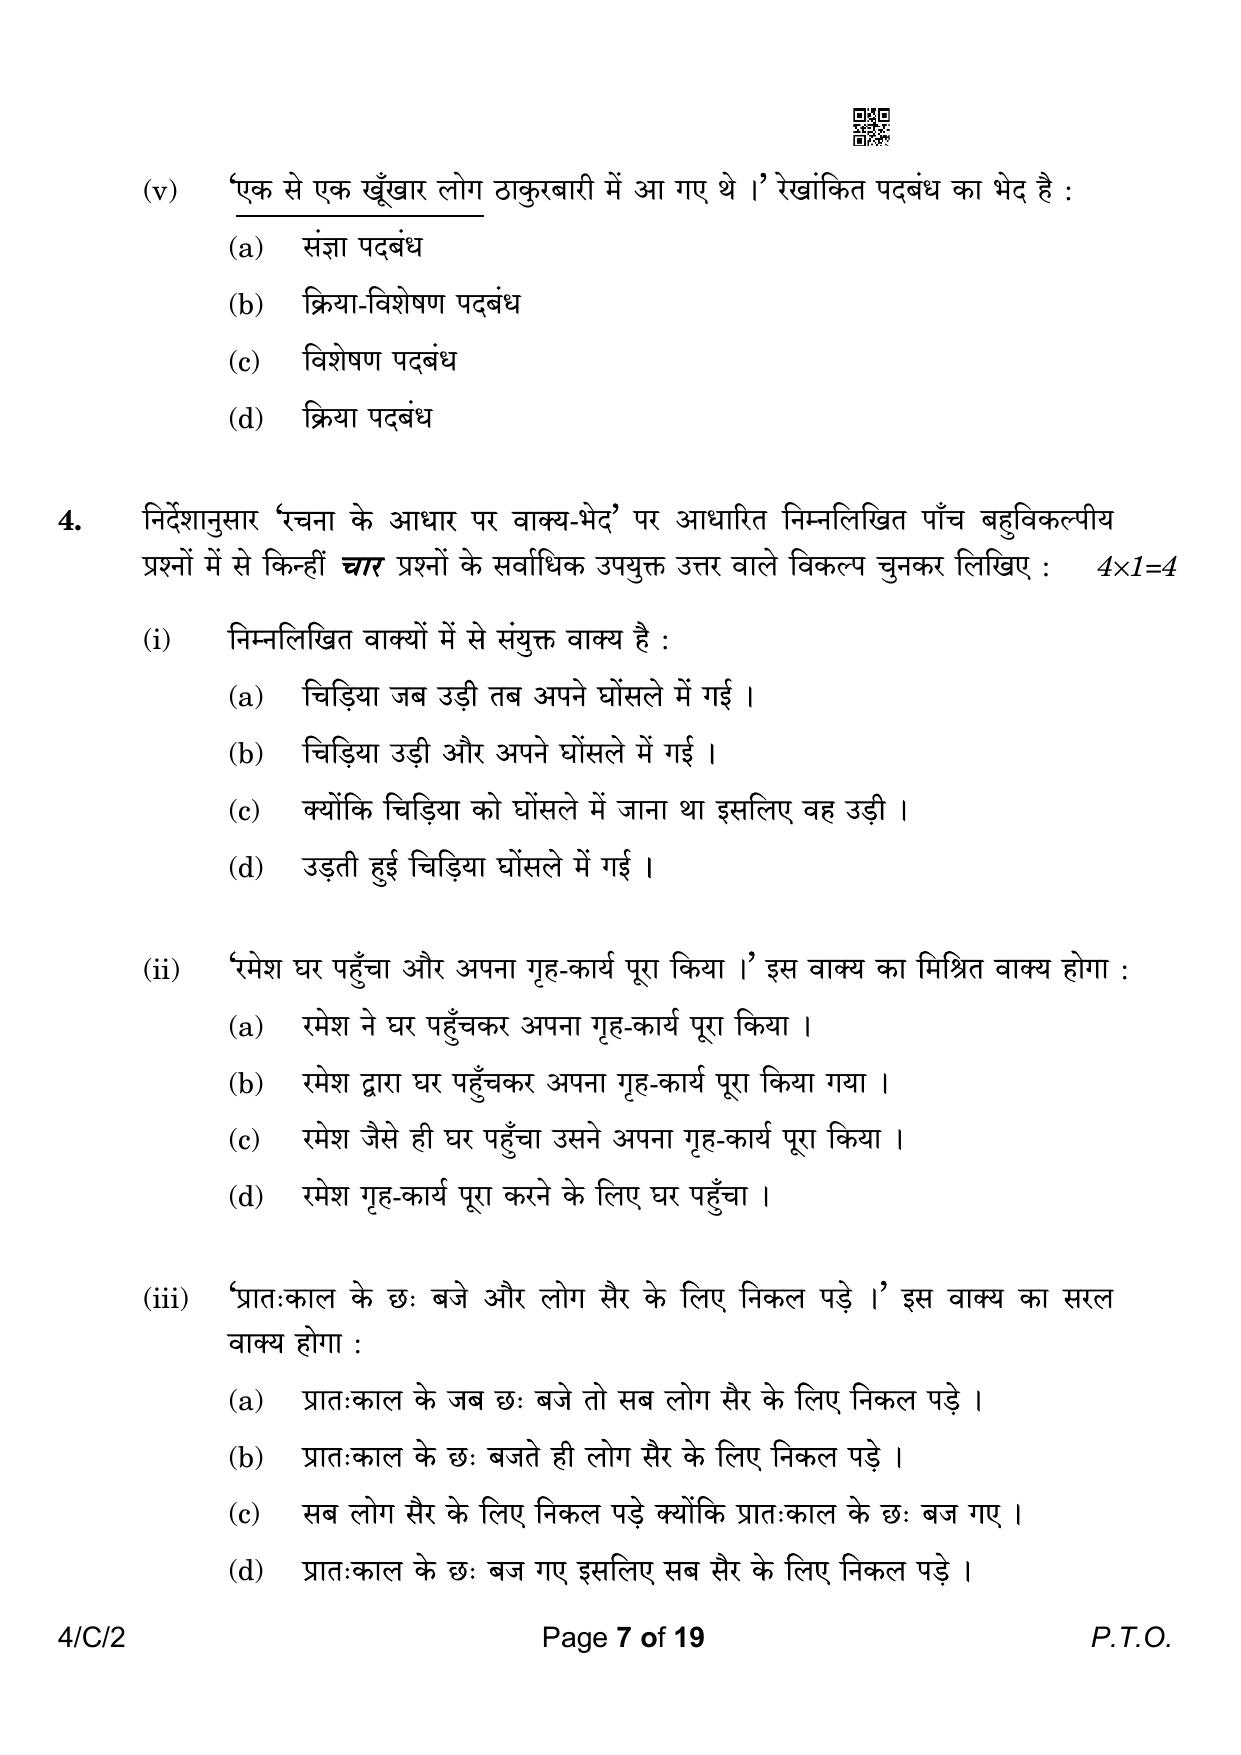 CBSE Class 10 4-2 Hindi B 2023 (Compartment) Question Paper - Page 7